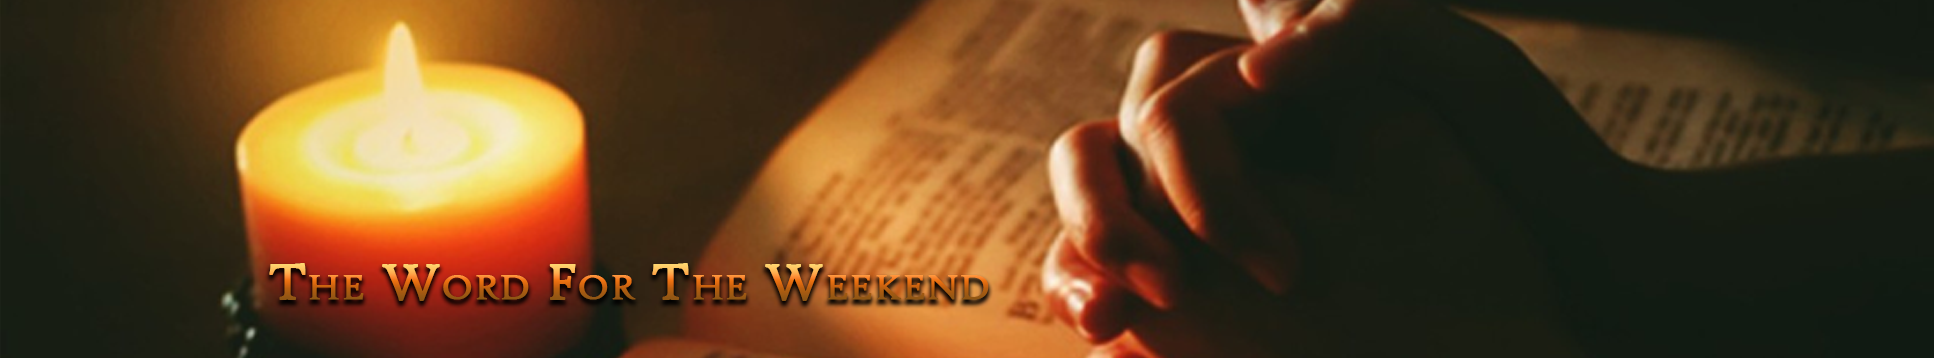 Word for the Weekend_channel_banner